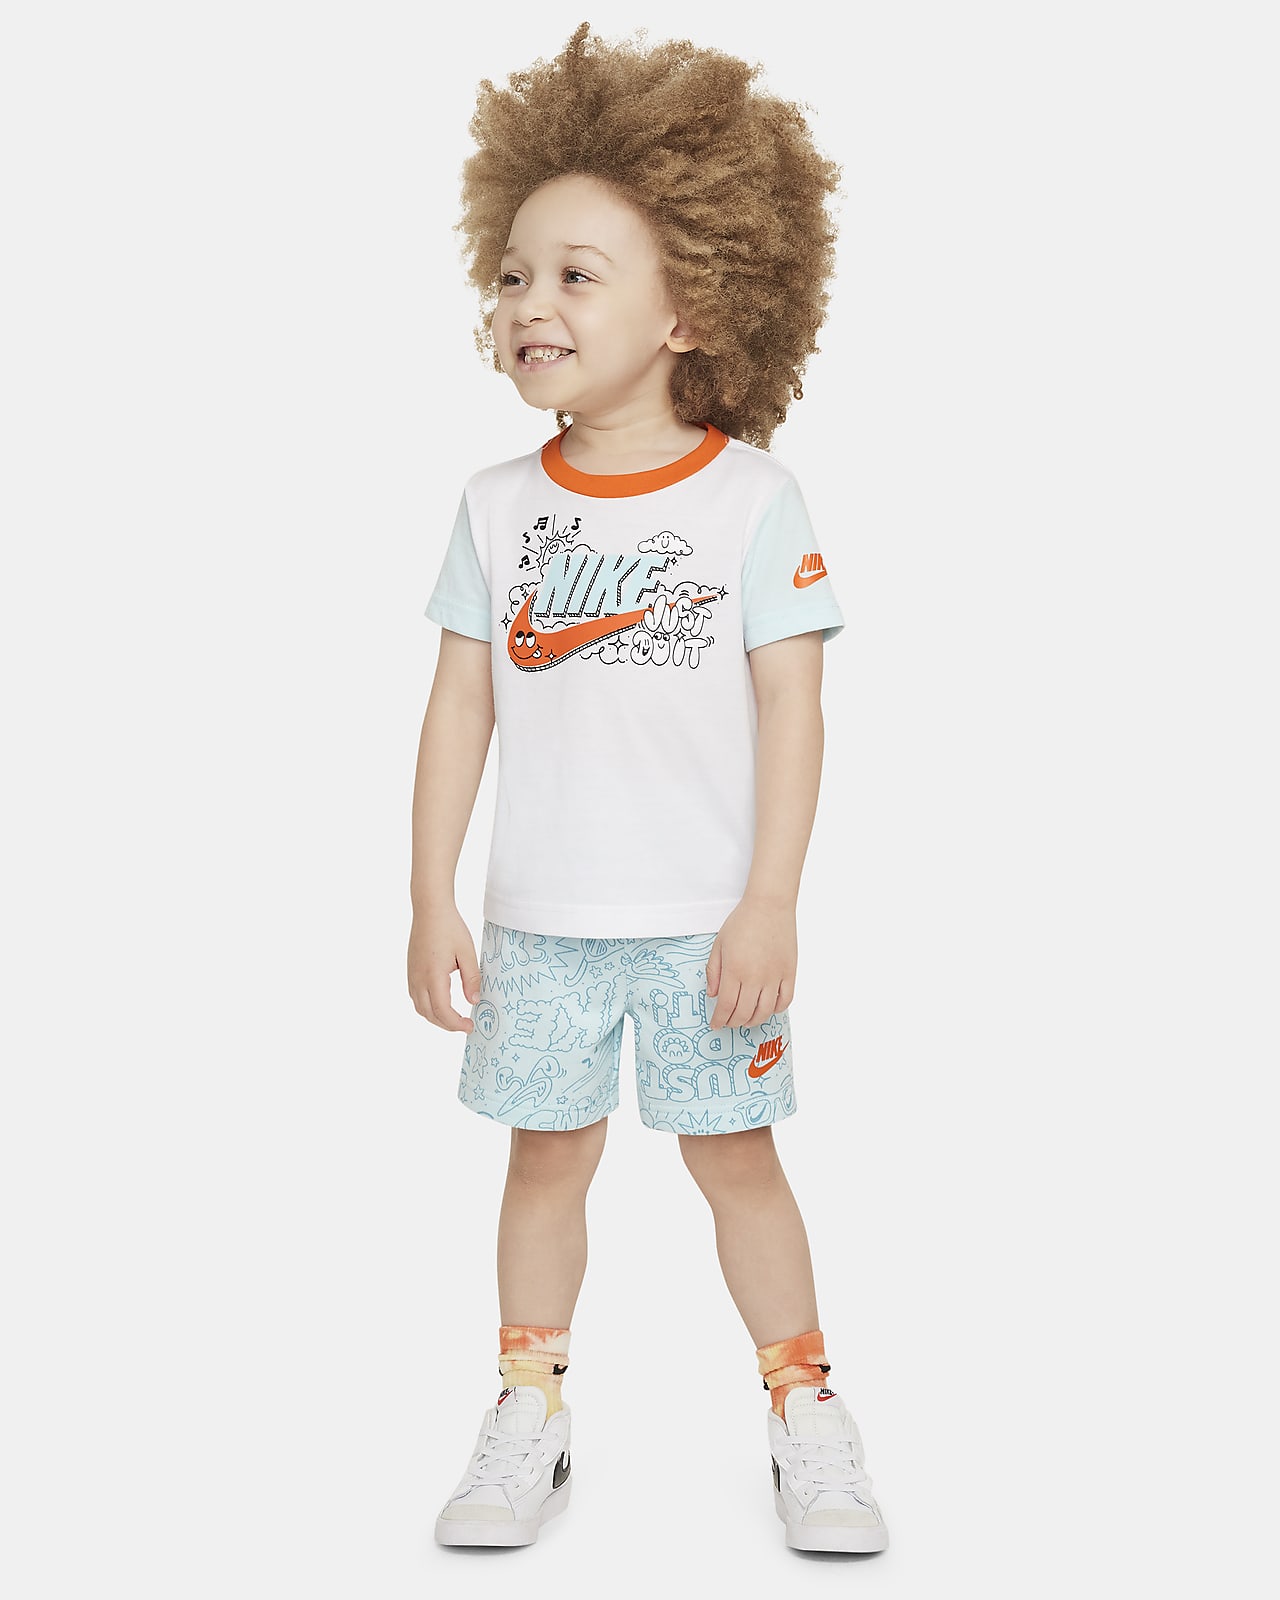 Nike Sportswear Create Your Own Adventure Toddler T-Shirt and Shorts Set